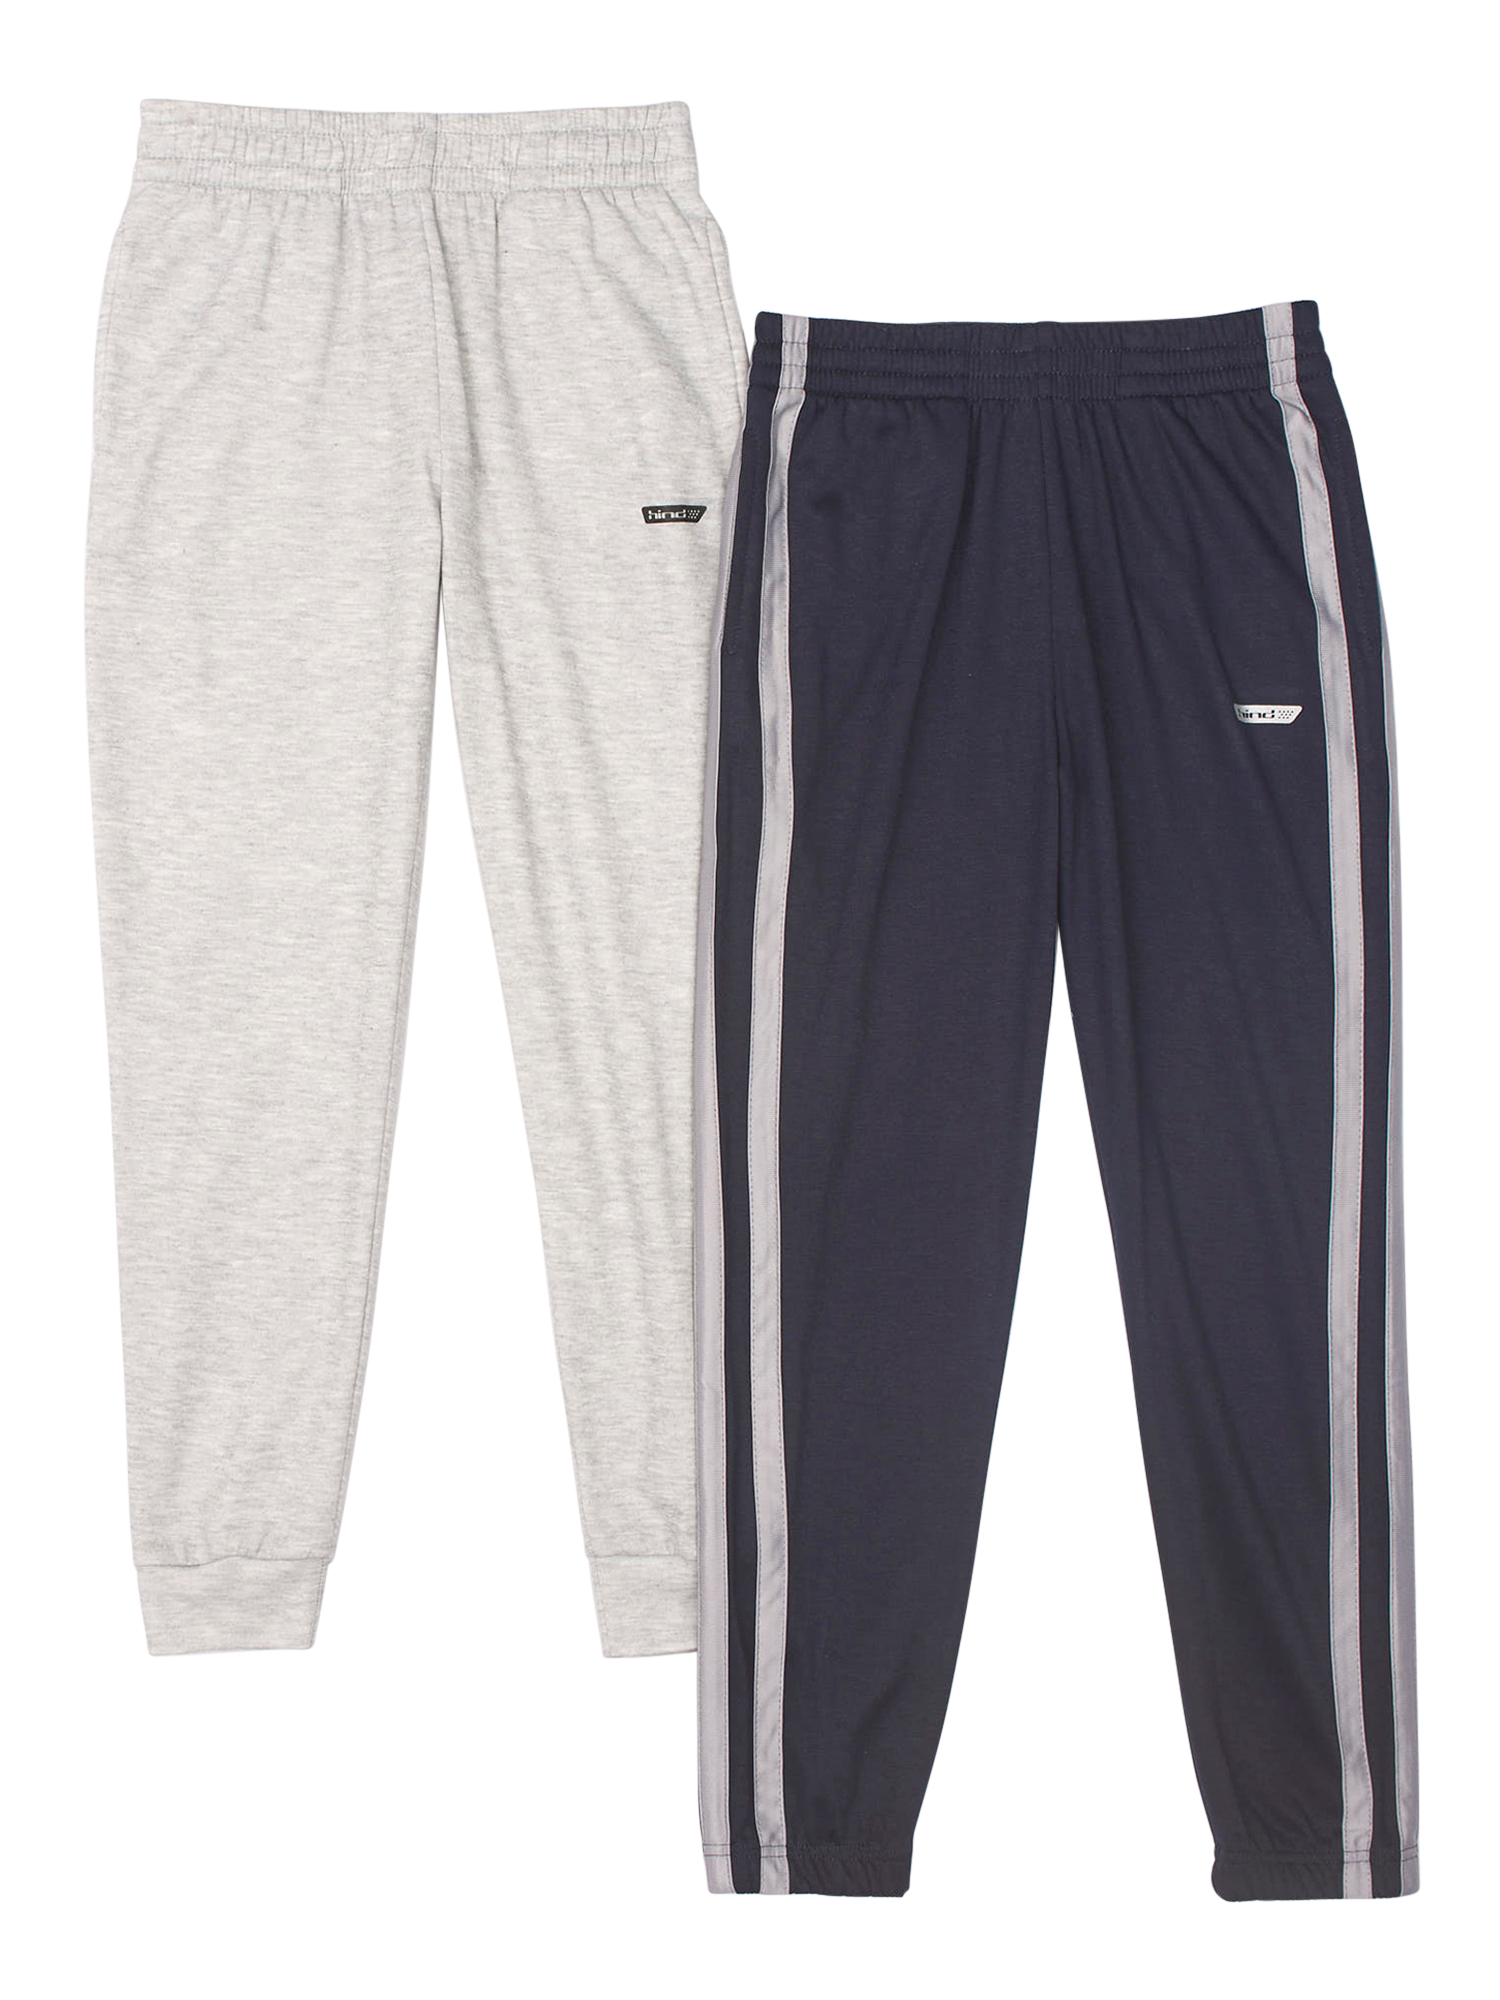 Hind Boys 3-Pack Fleece and Tricot Jogger Sweatpants with Pockets for Athletic /& Casual Wear